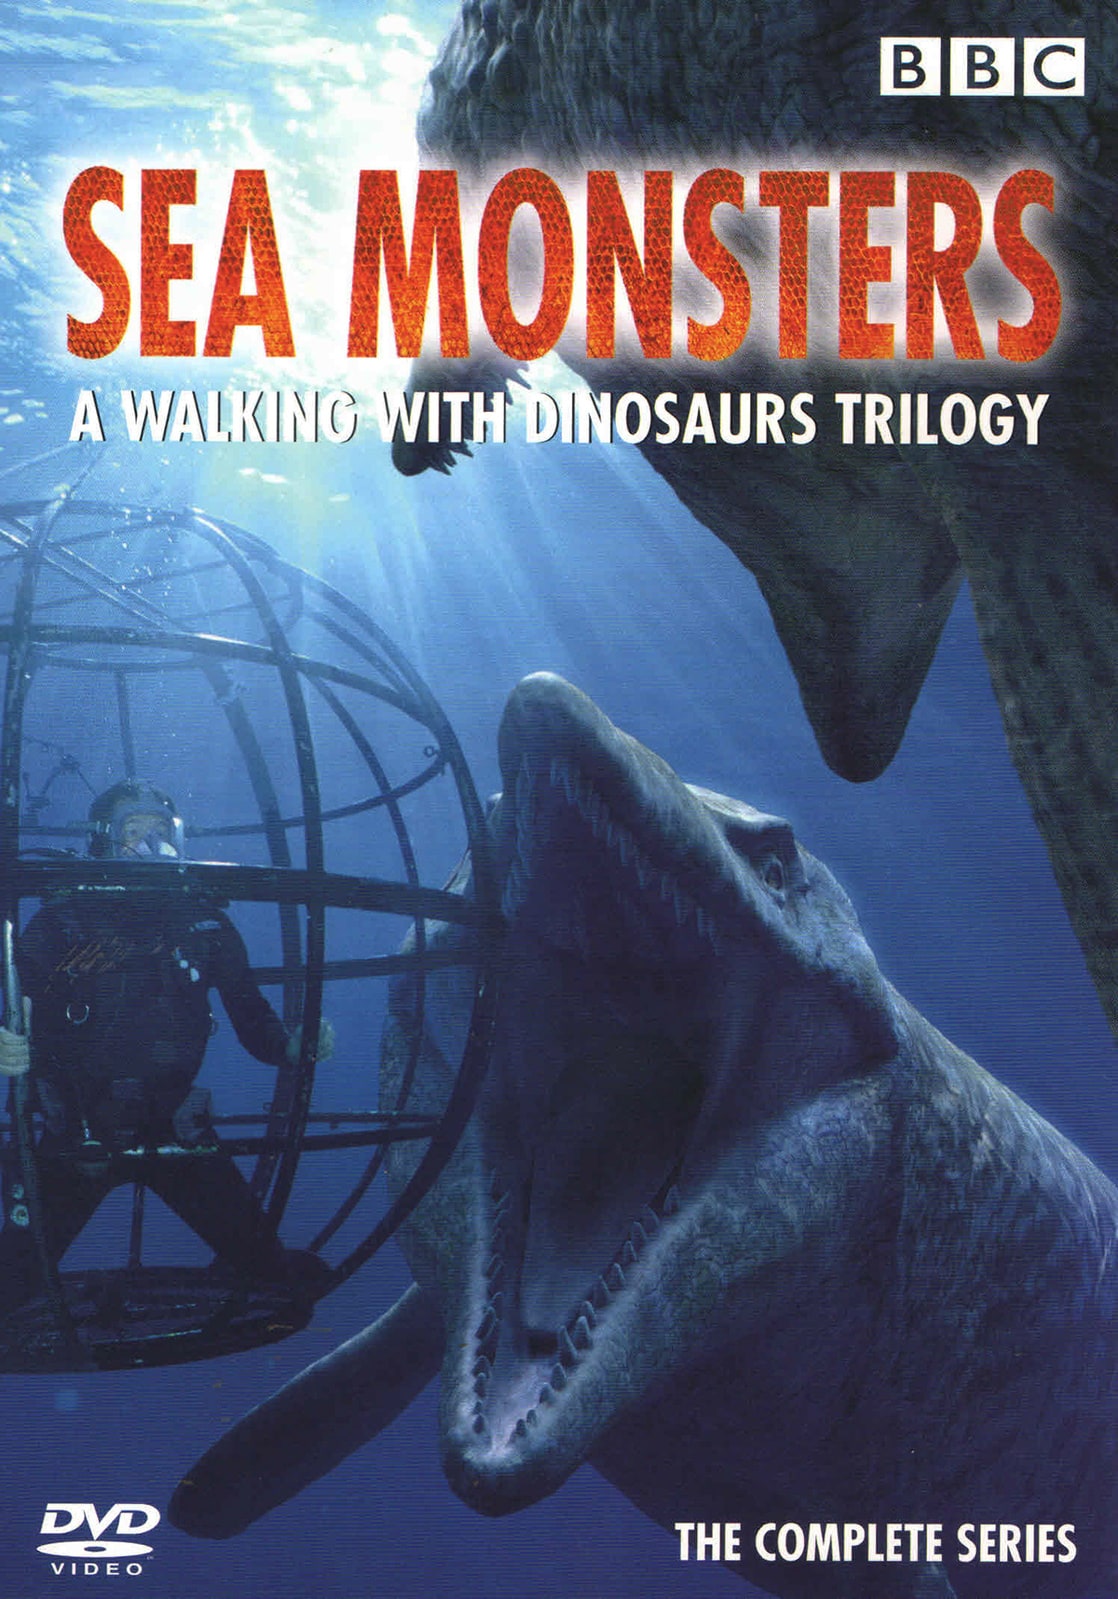 Sea Monsters: A Walking with Dinosaurs Trilogy